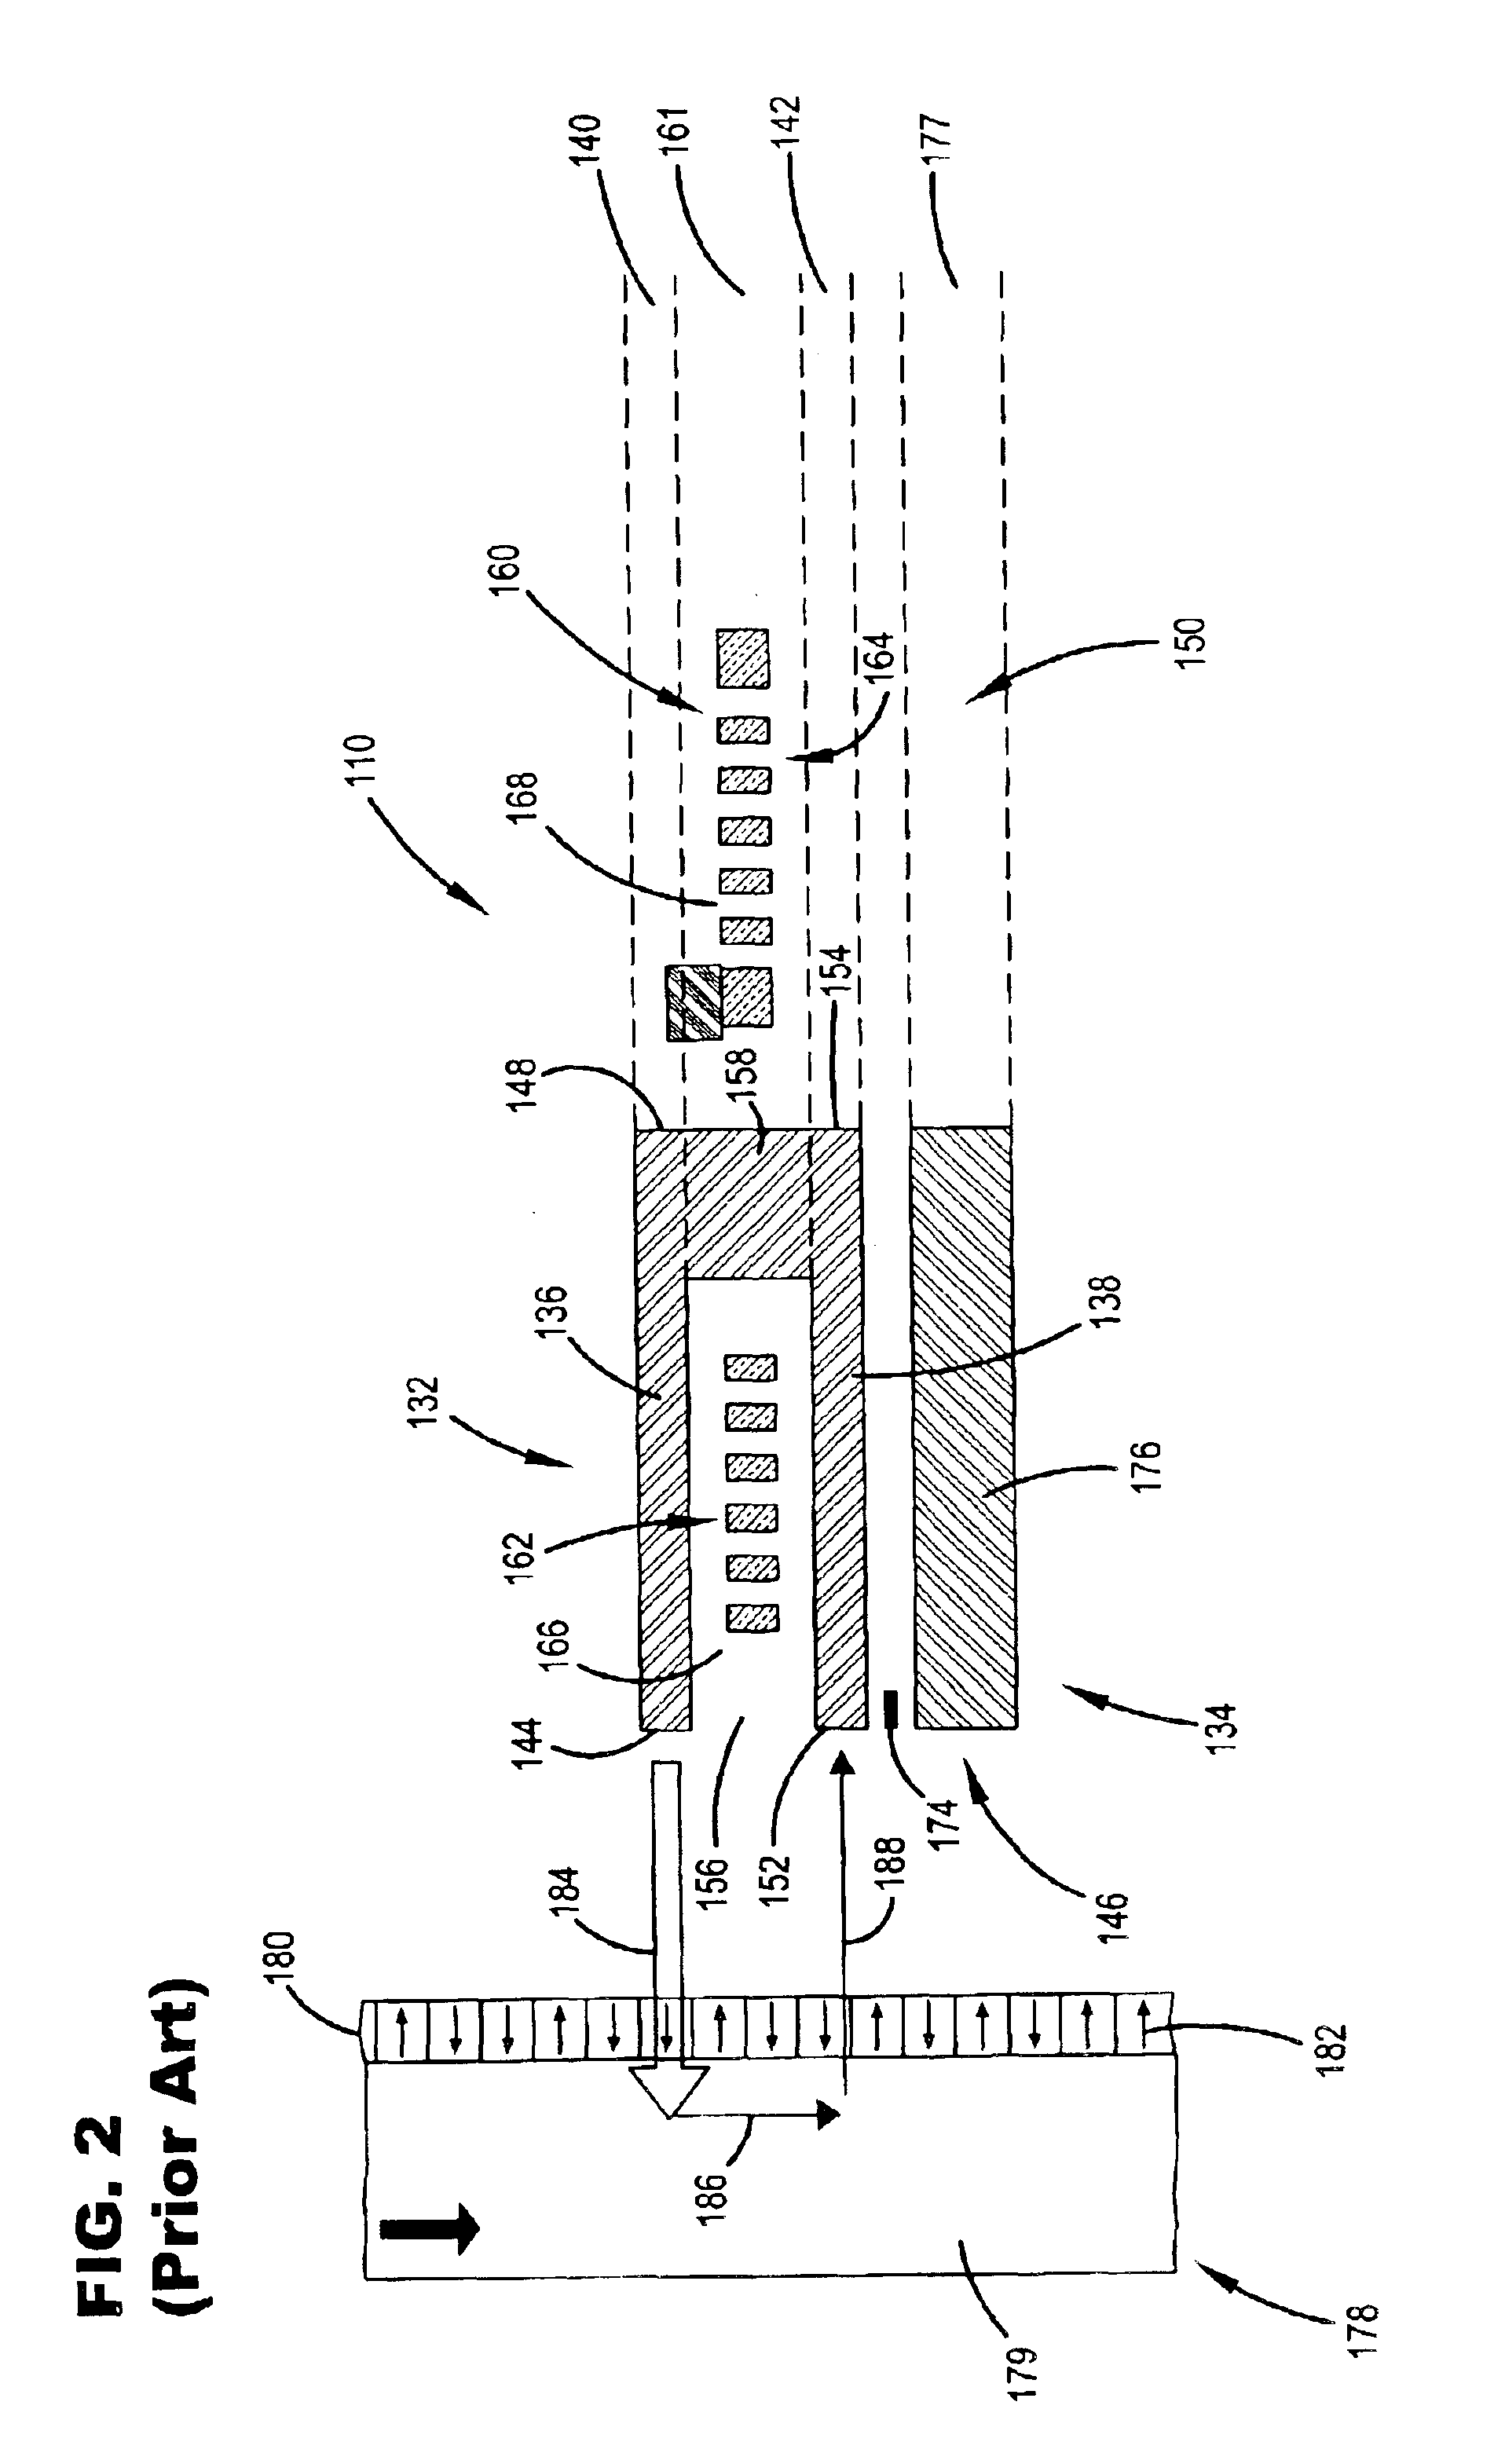 Magnetic head having a heat dissipating structure